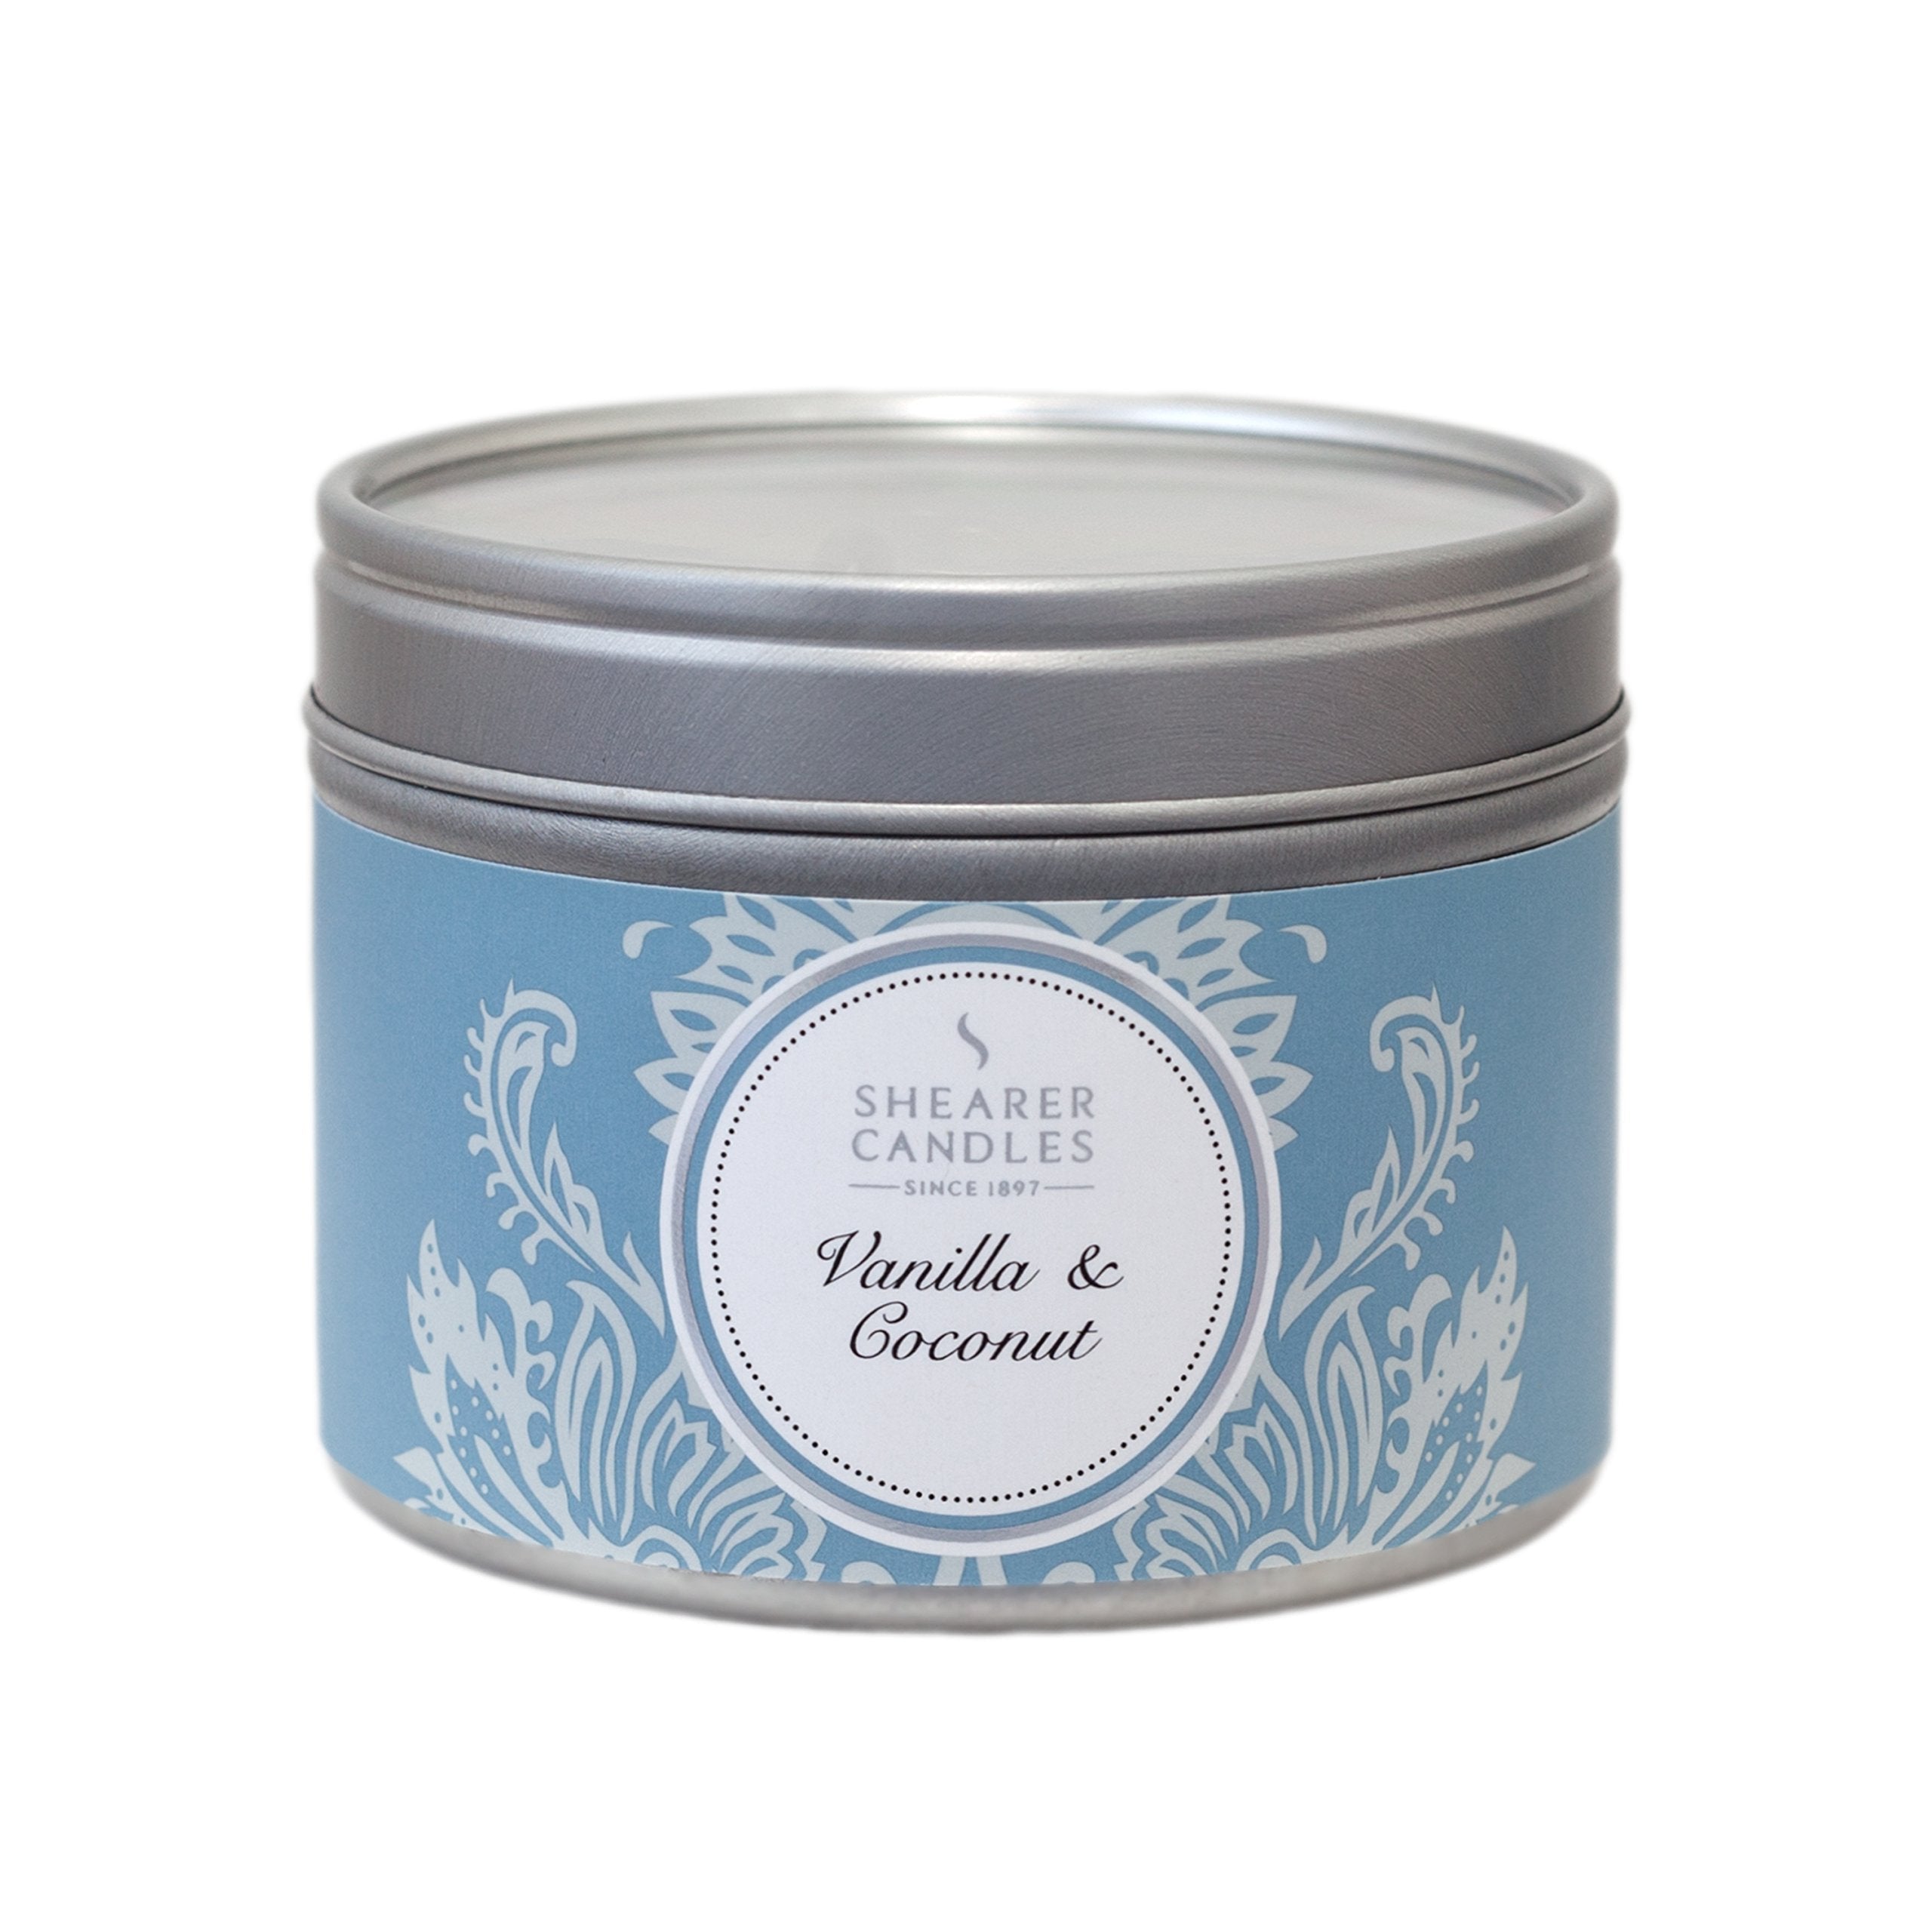 Shearer Candles Vanilla and Coconut Small Scented Silver Tin Candle - White